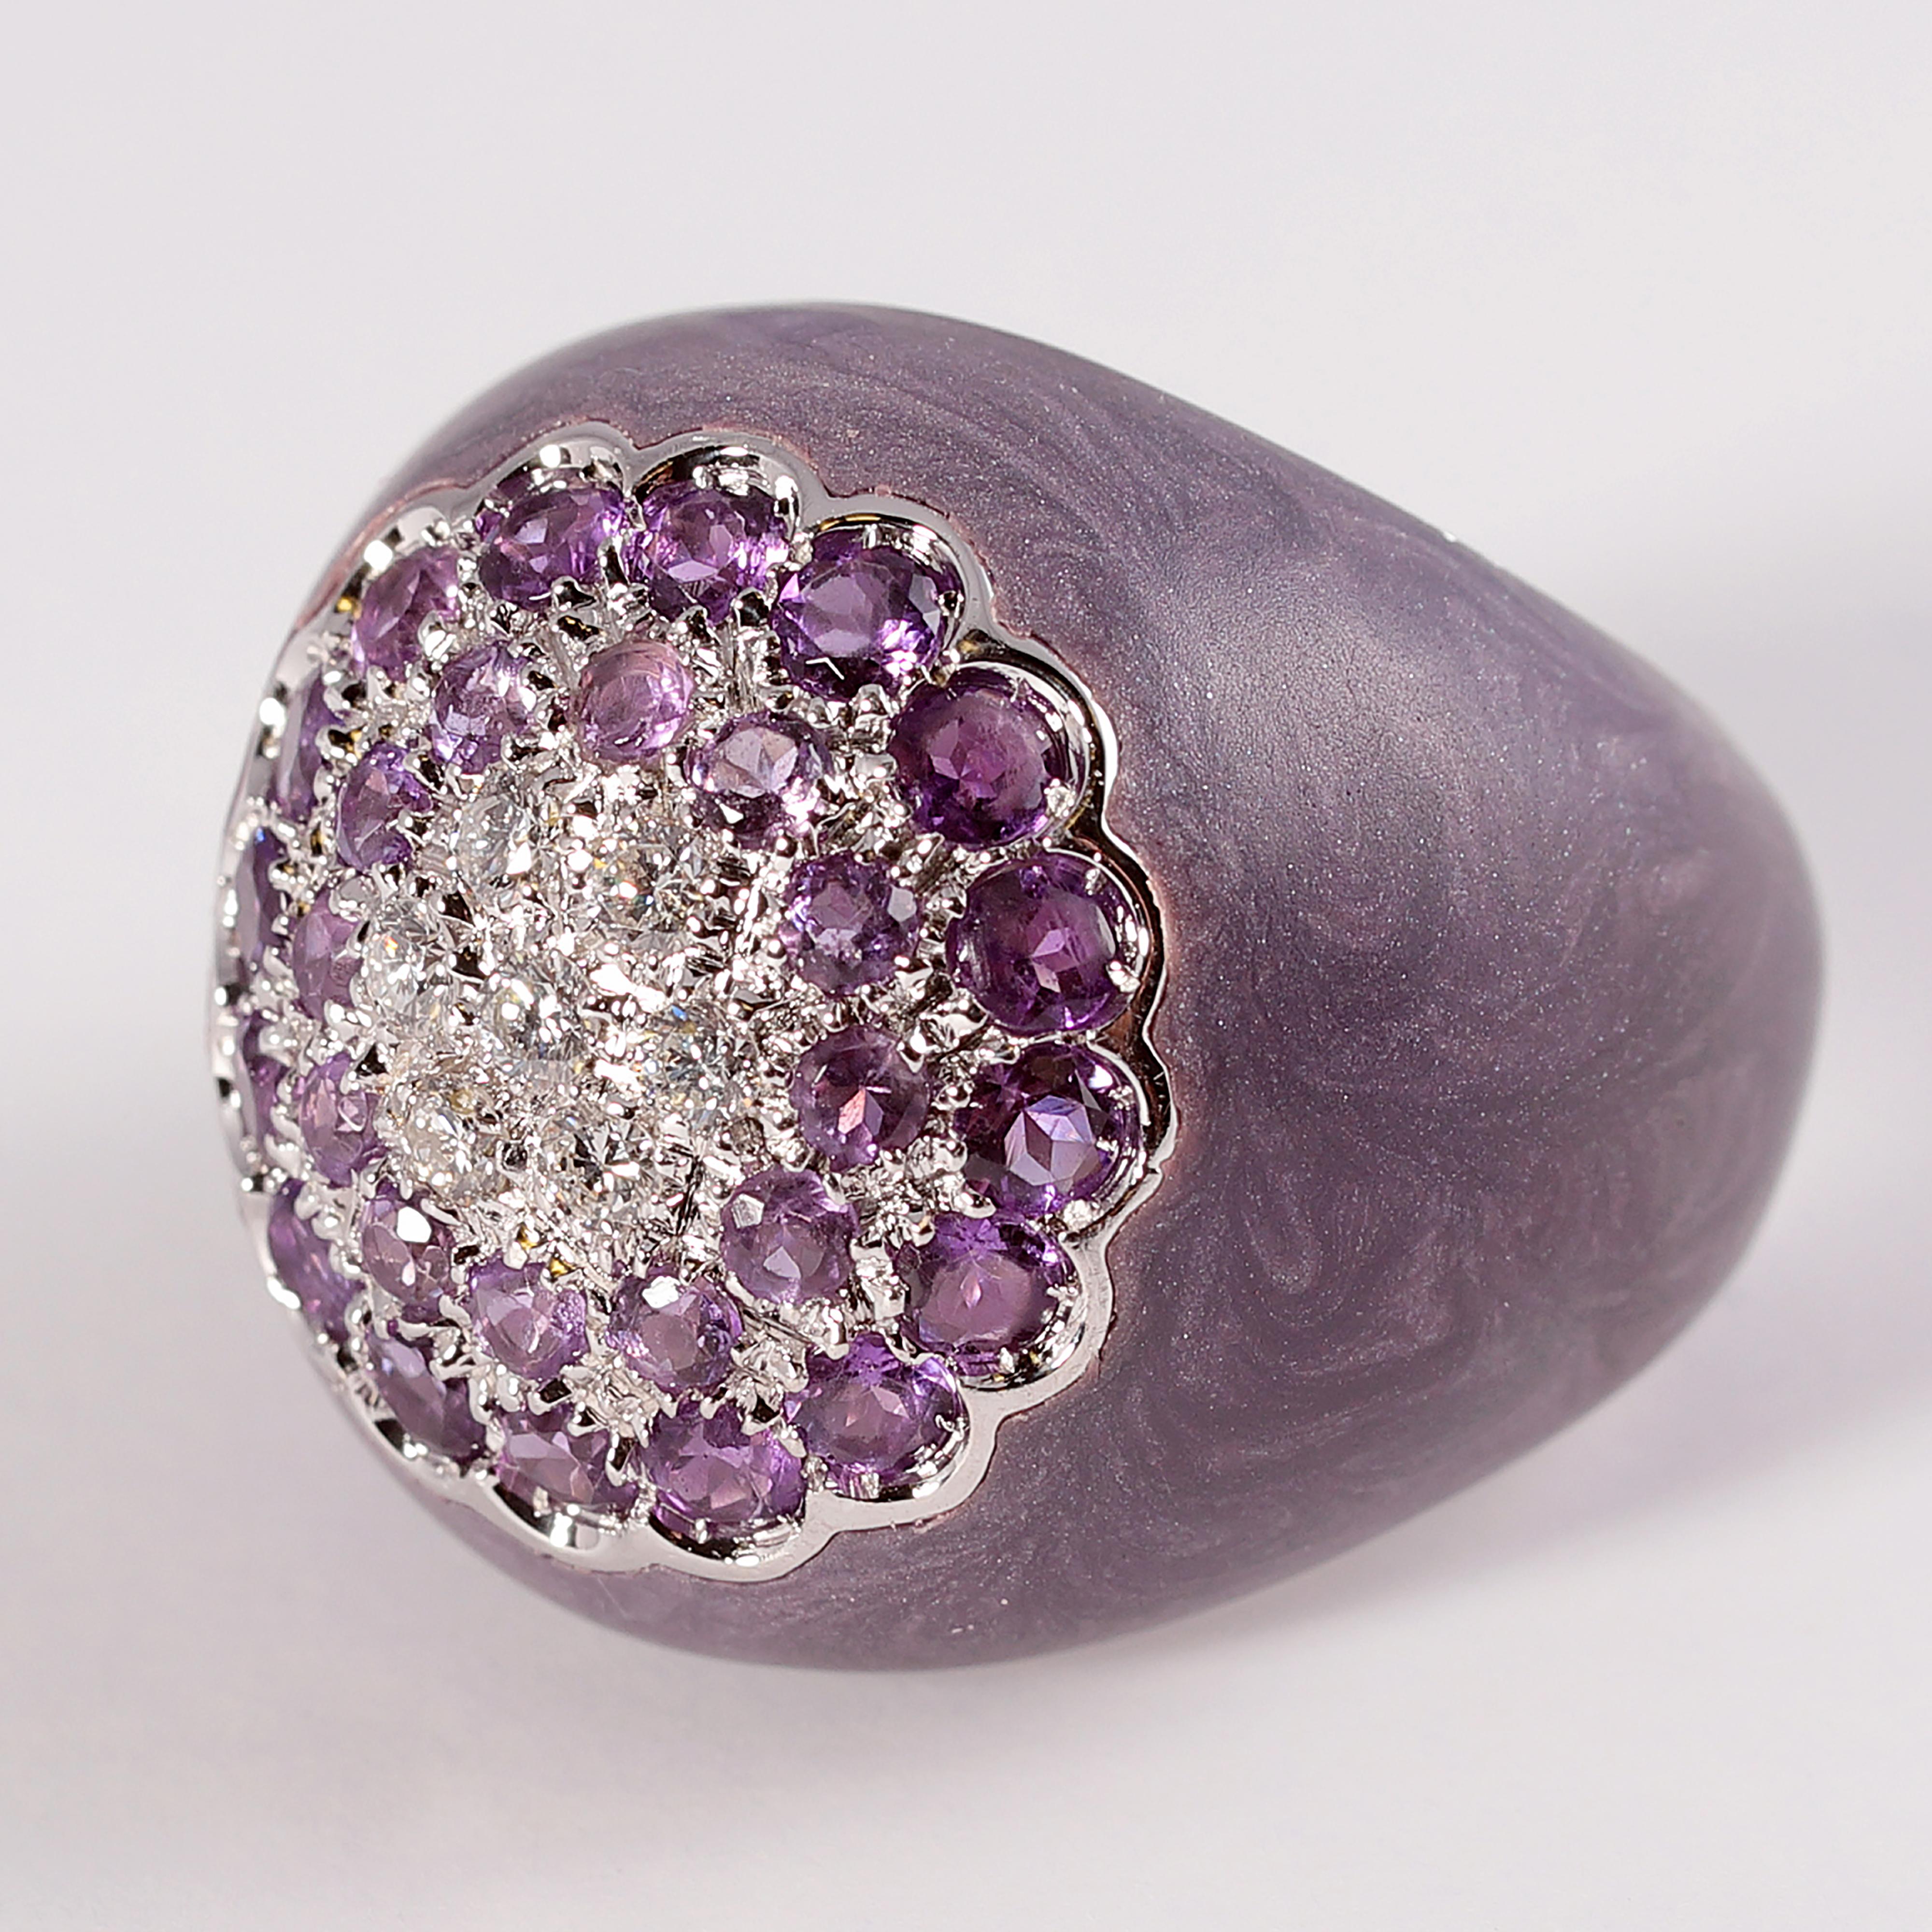 18 Karat ring from Bonato & Massoni of Milan with 0.25 carats of pave set diamonds and amethysts with a floral motif.  The stones sit atop a dome of swirled purple and silver enamel.  This unusual piece is quite a conversation starter.  Size 7.